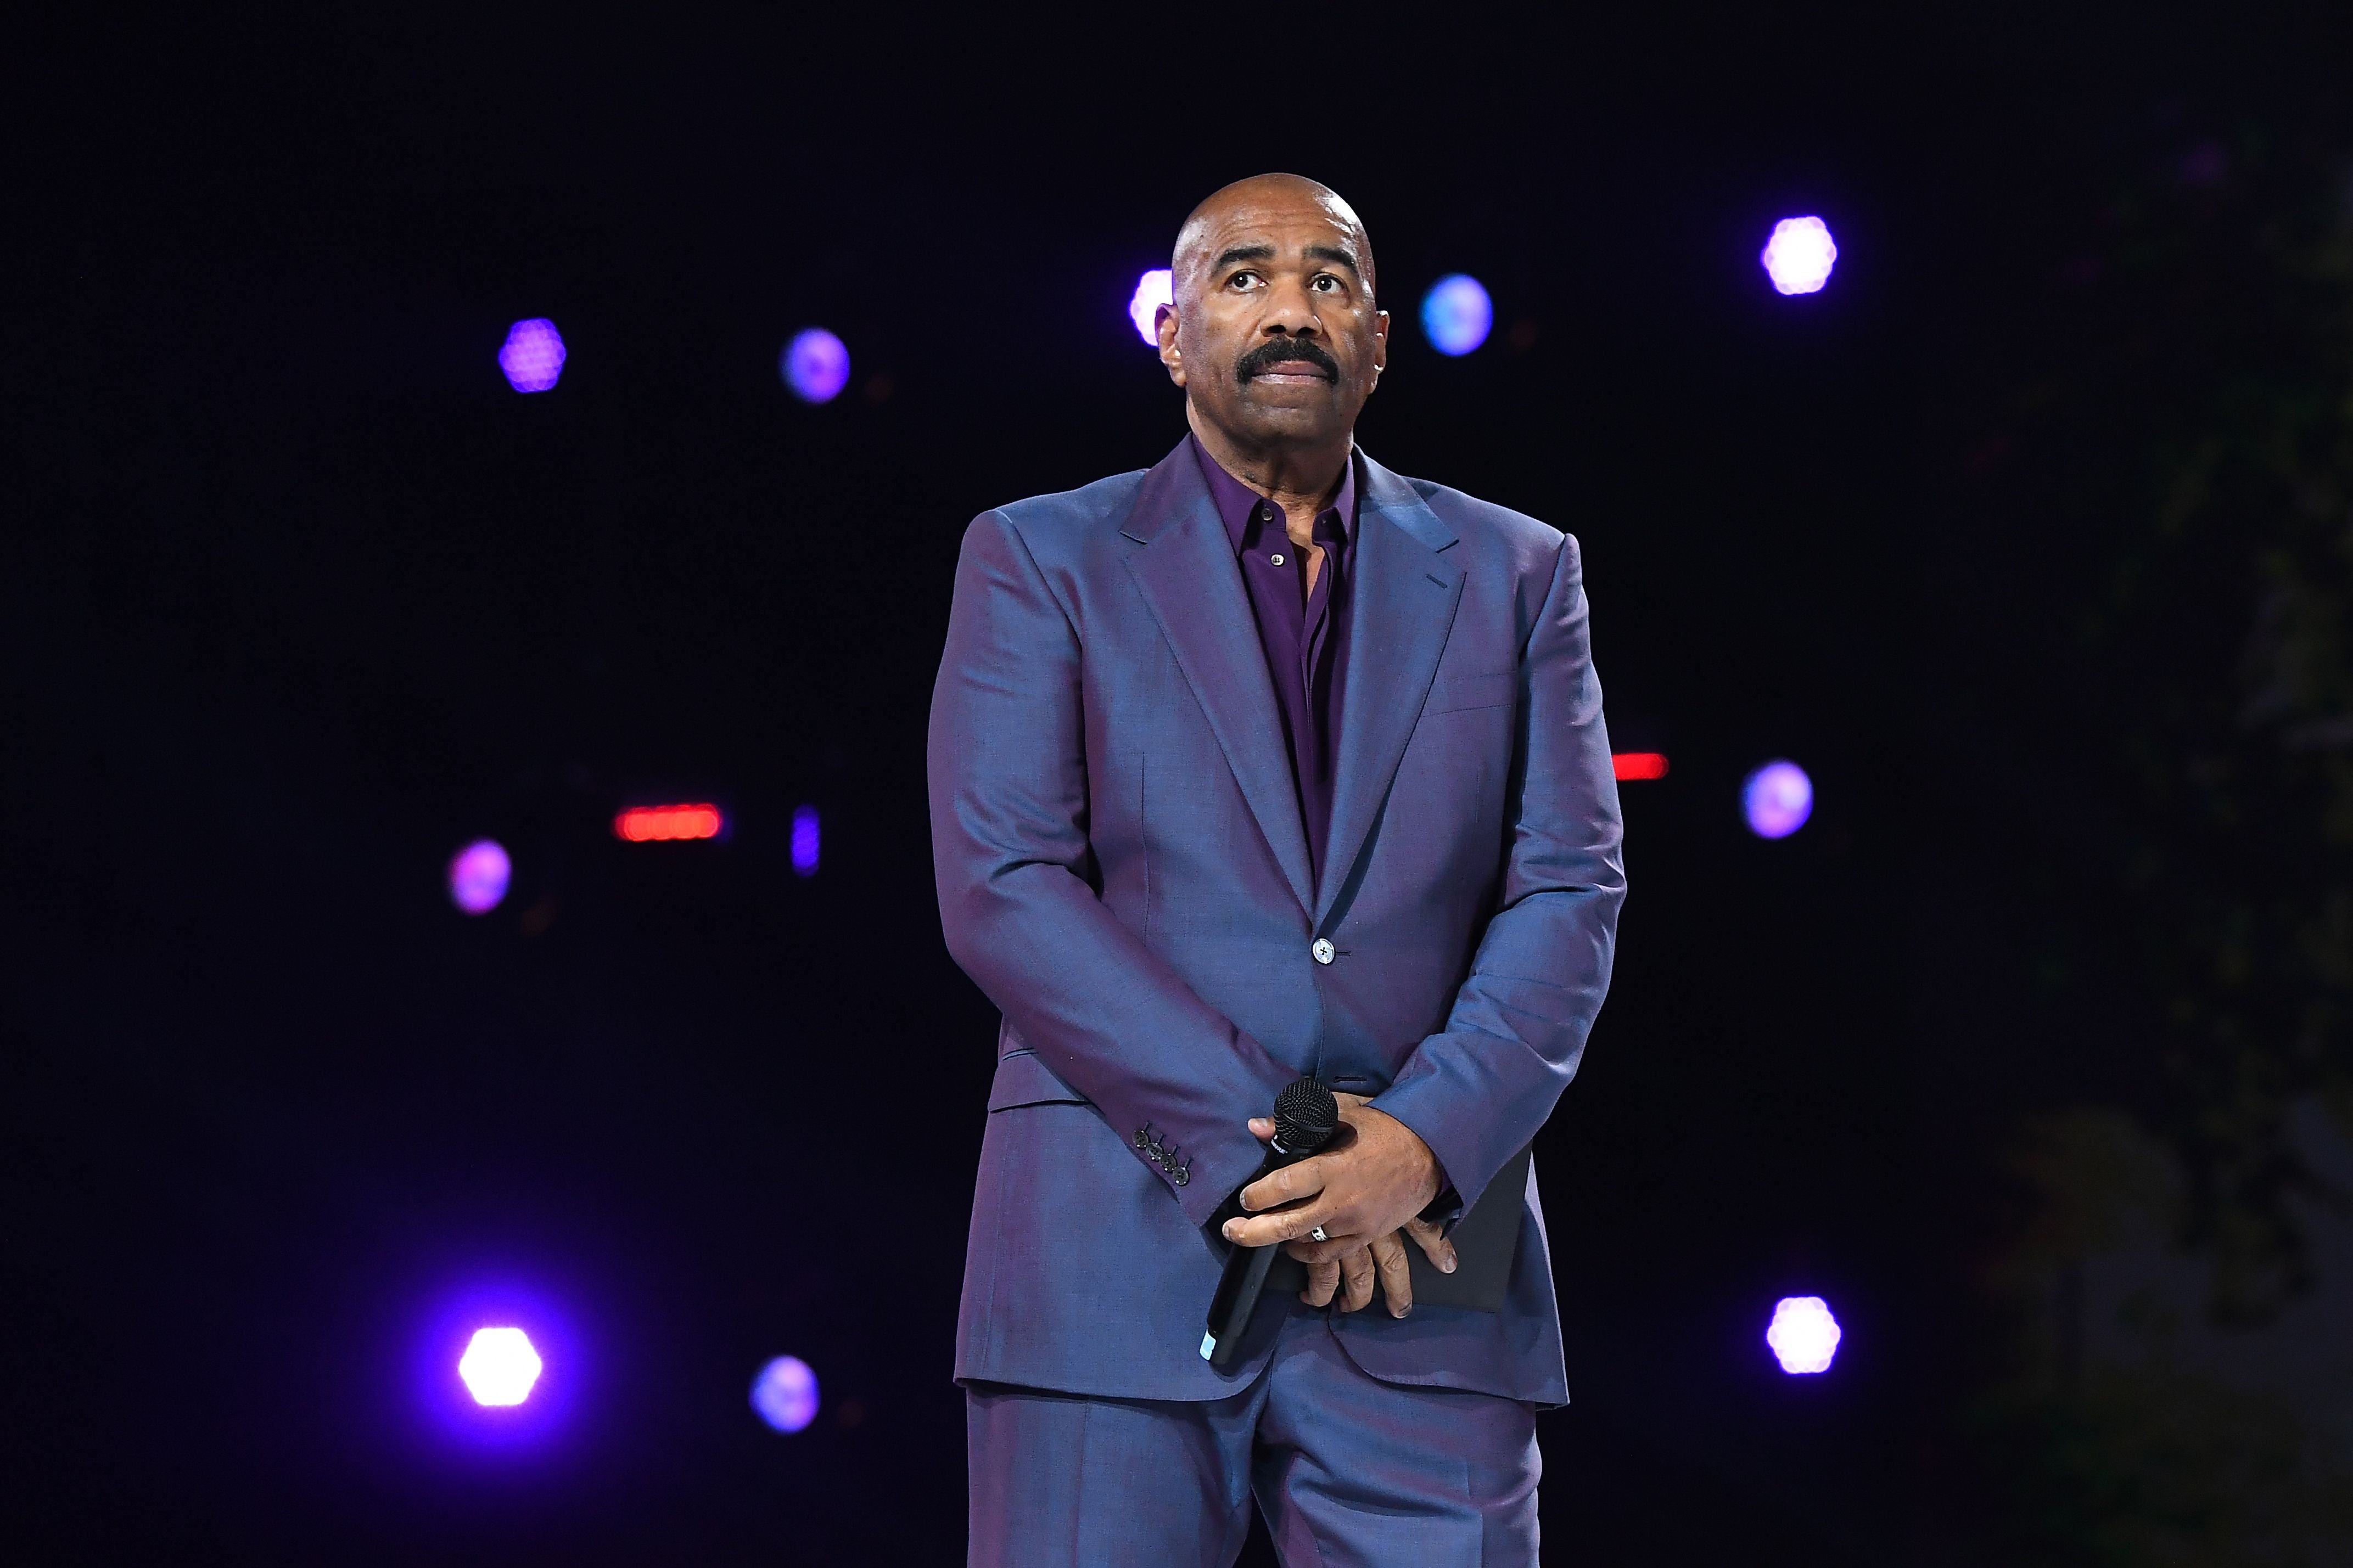 "Famiy Feud" host Steve Harvey onstage during the Beloved Benefit at Mercedes-Benz Stadium in Atlanta, Georgia | Photo: Getty Images